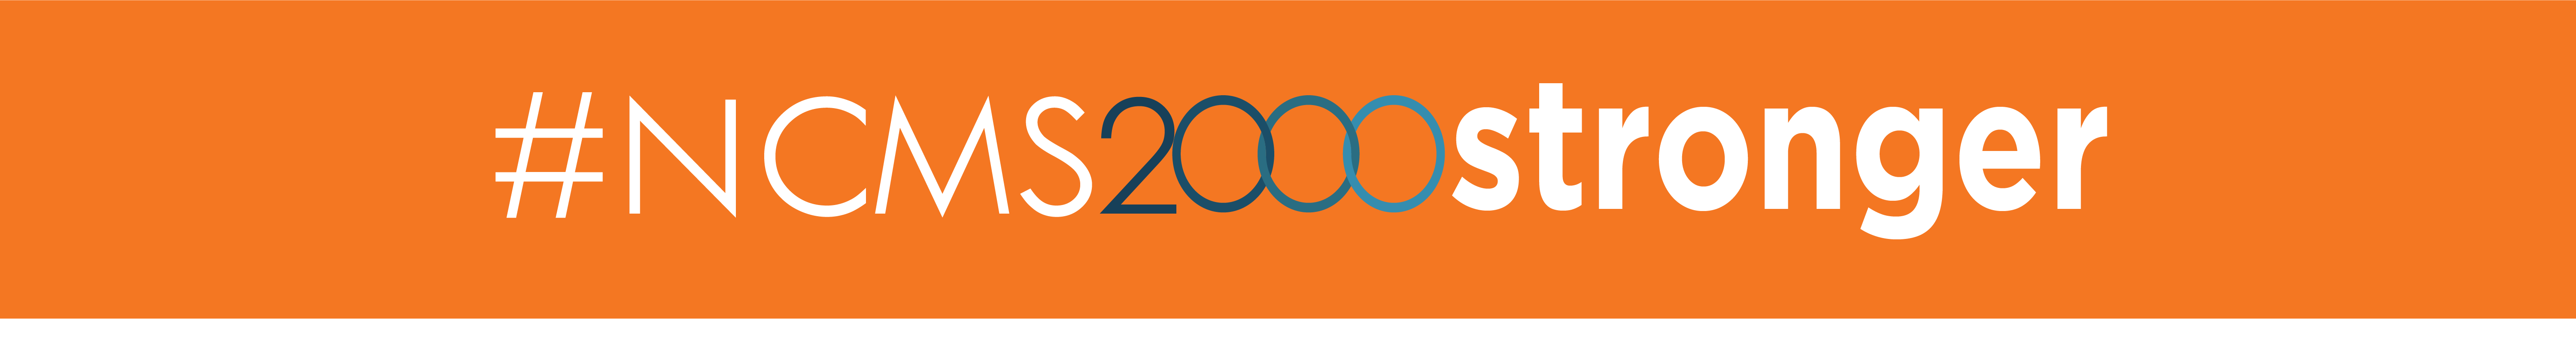 Help make us #NCMS2000stronger -- Join the NC Medical Society today